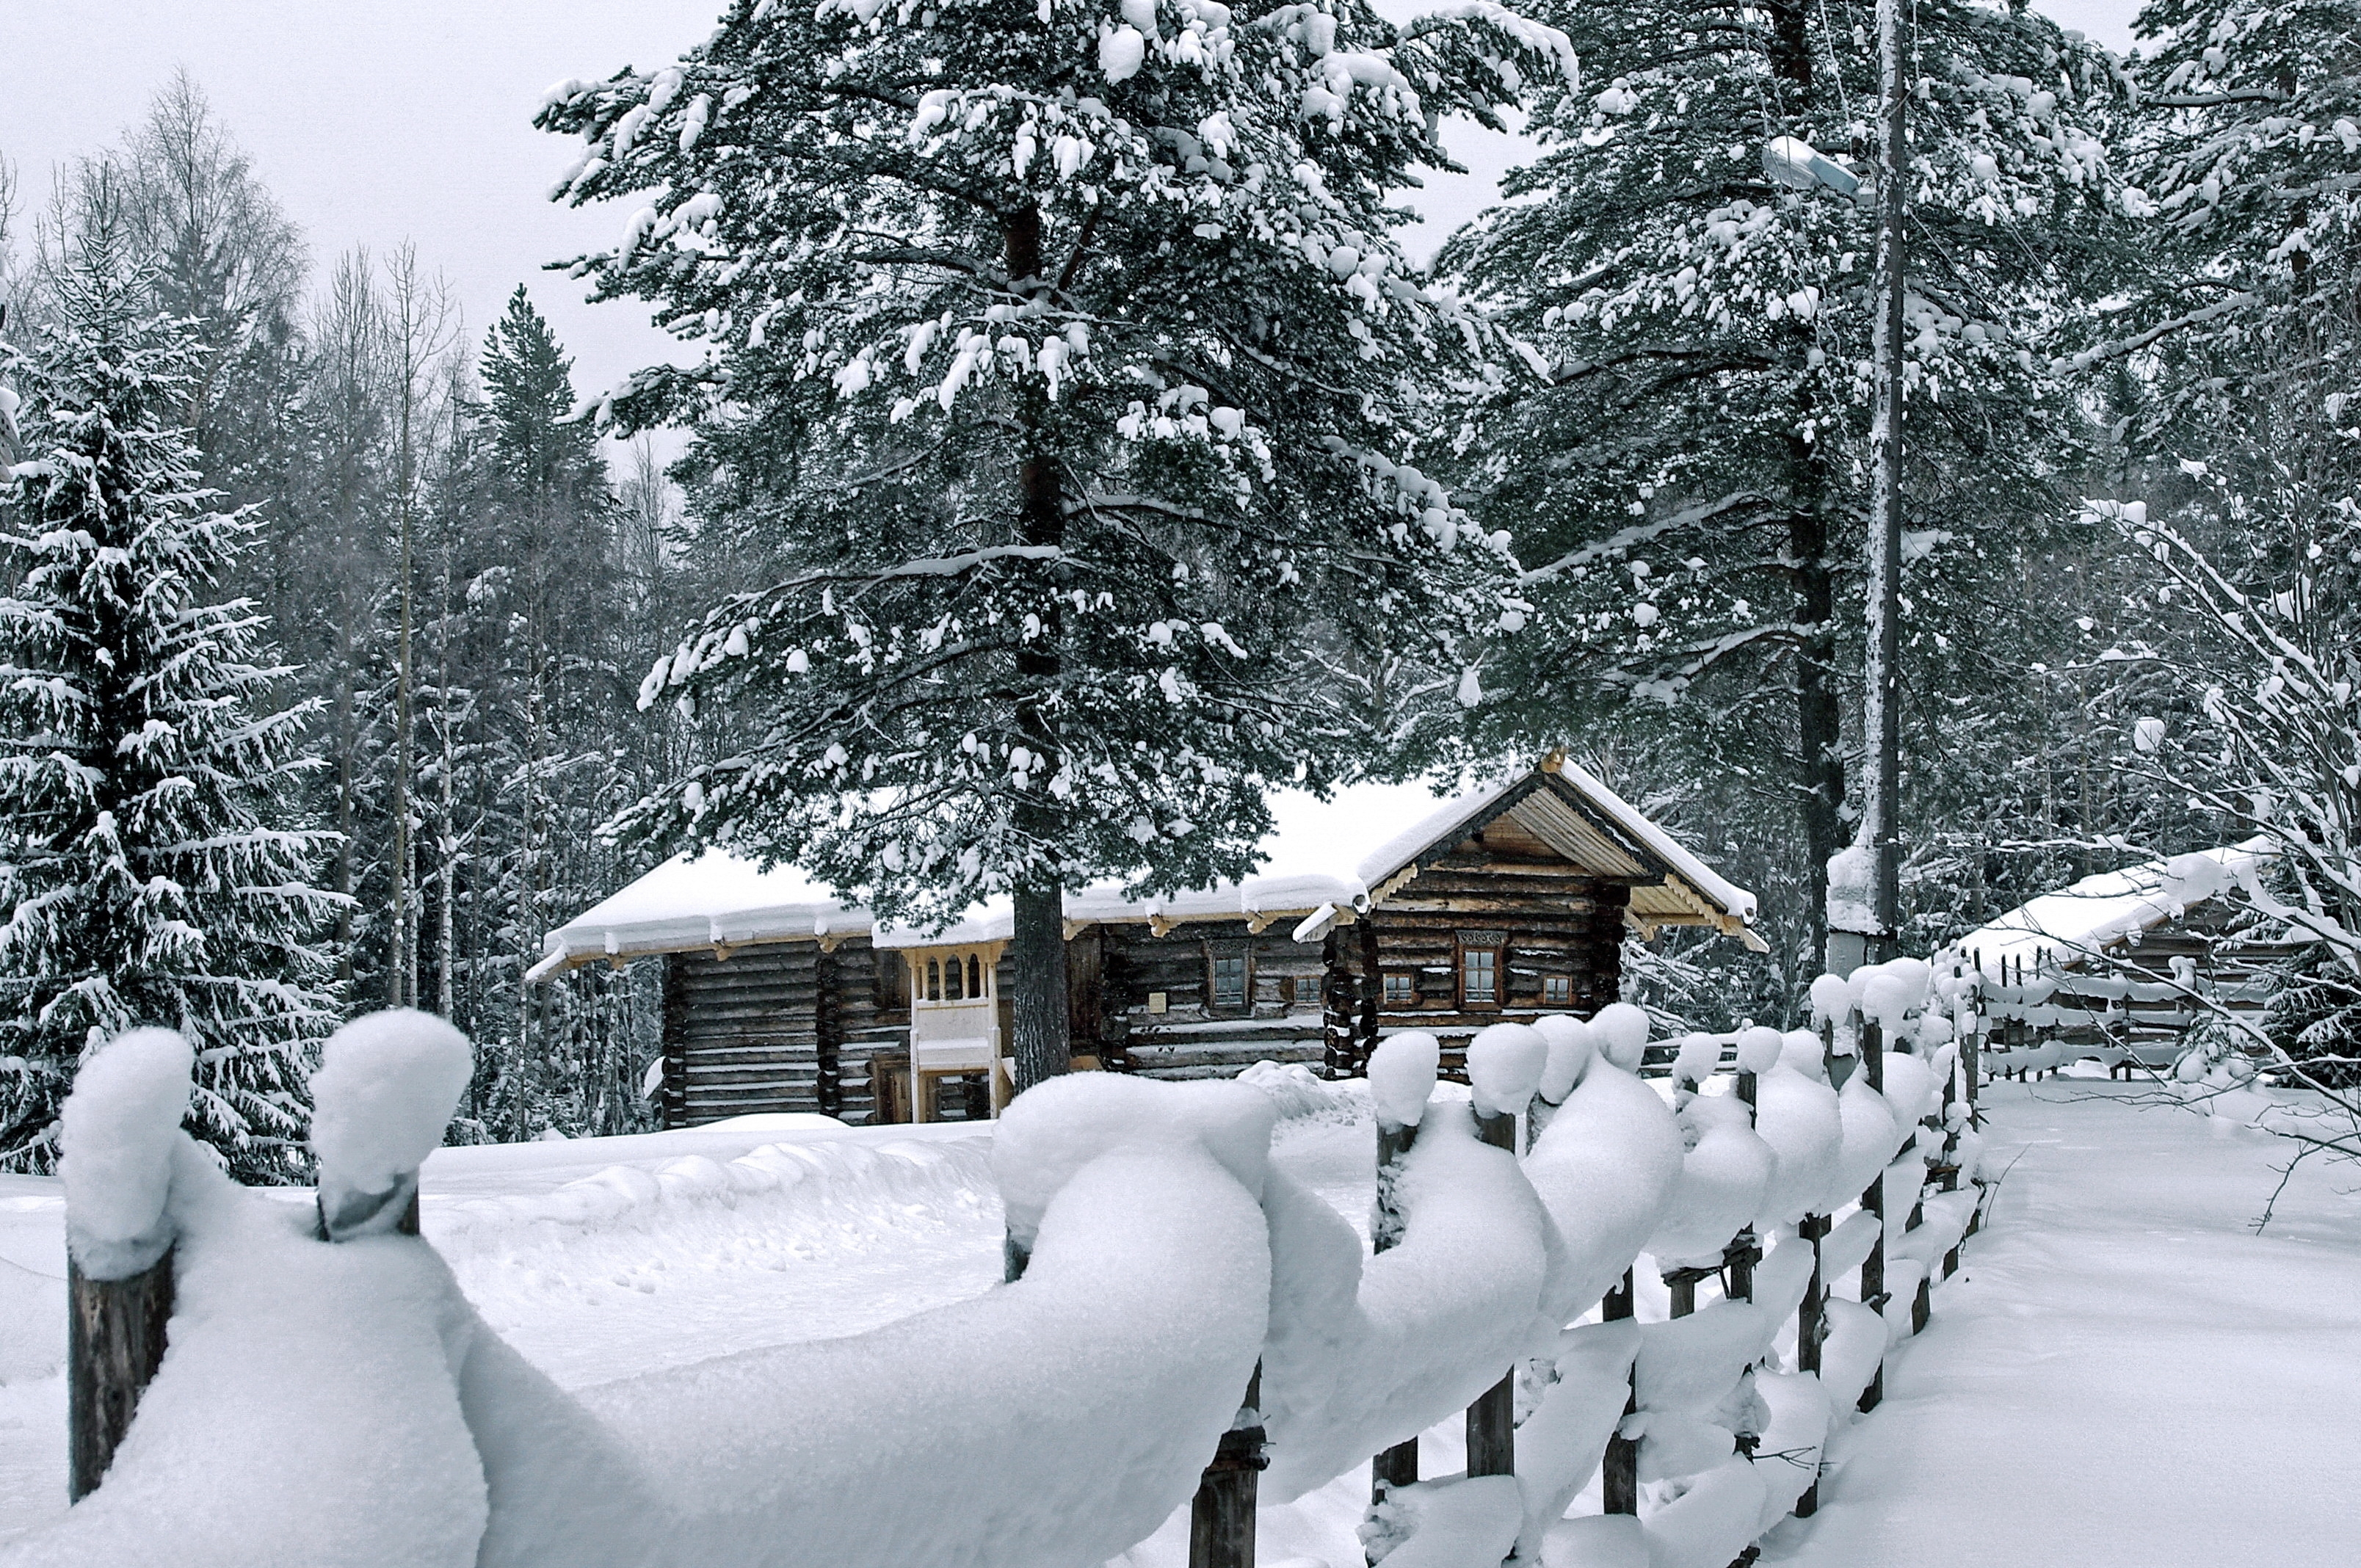 PC Wallpapers building, nature, pine, snow, house, fence, construction, drifts, izba, robe, garb